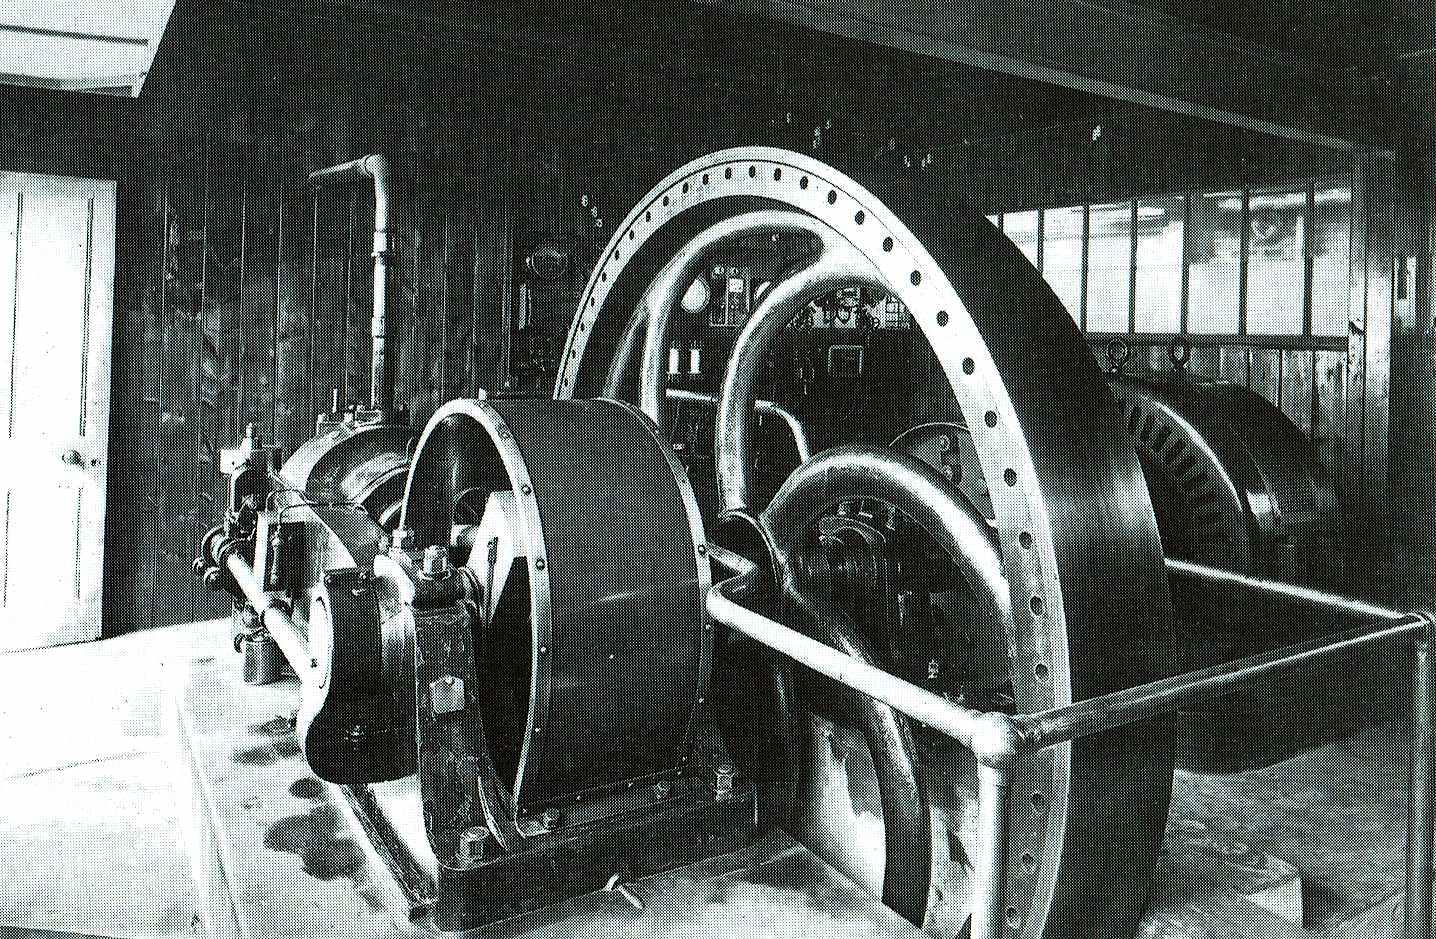 36hp National gas engine from 1909 mated to a DC Crompton generator